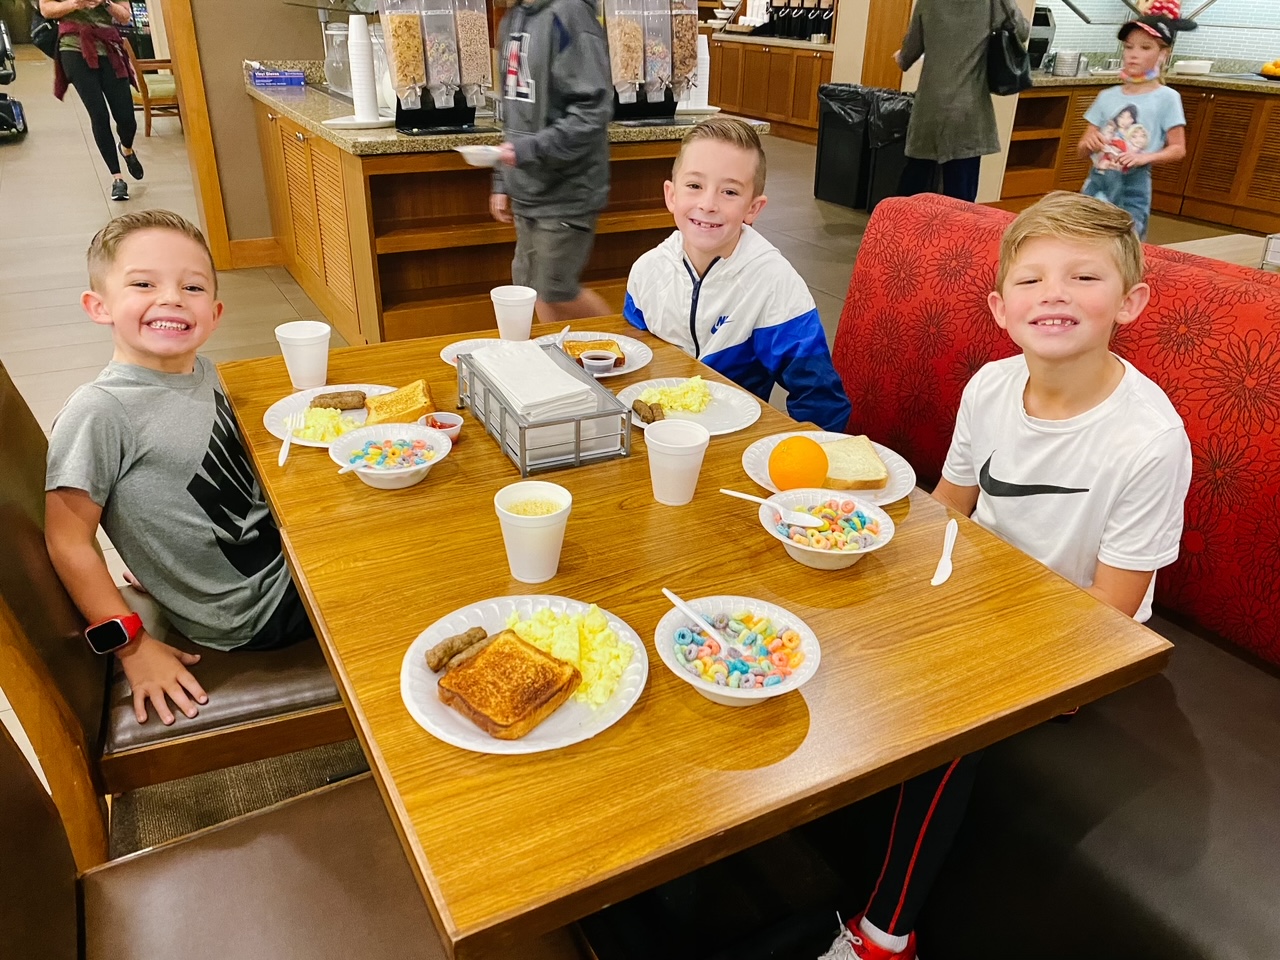 Three boys at table with breakfast foods